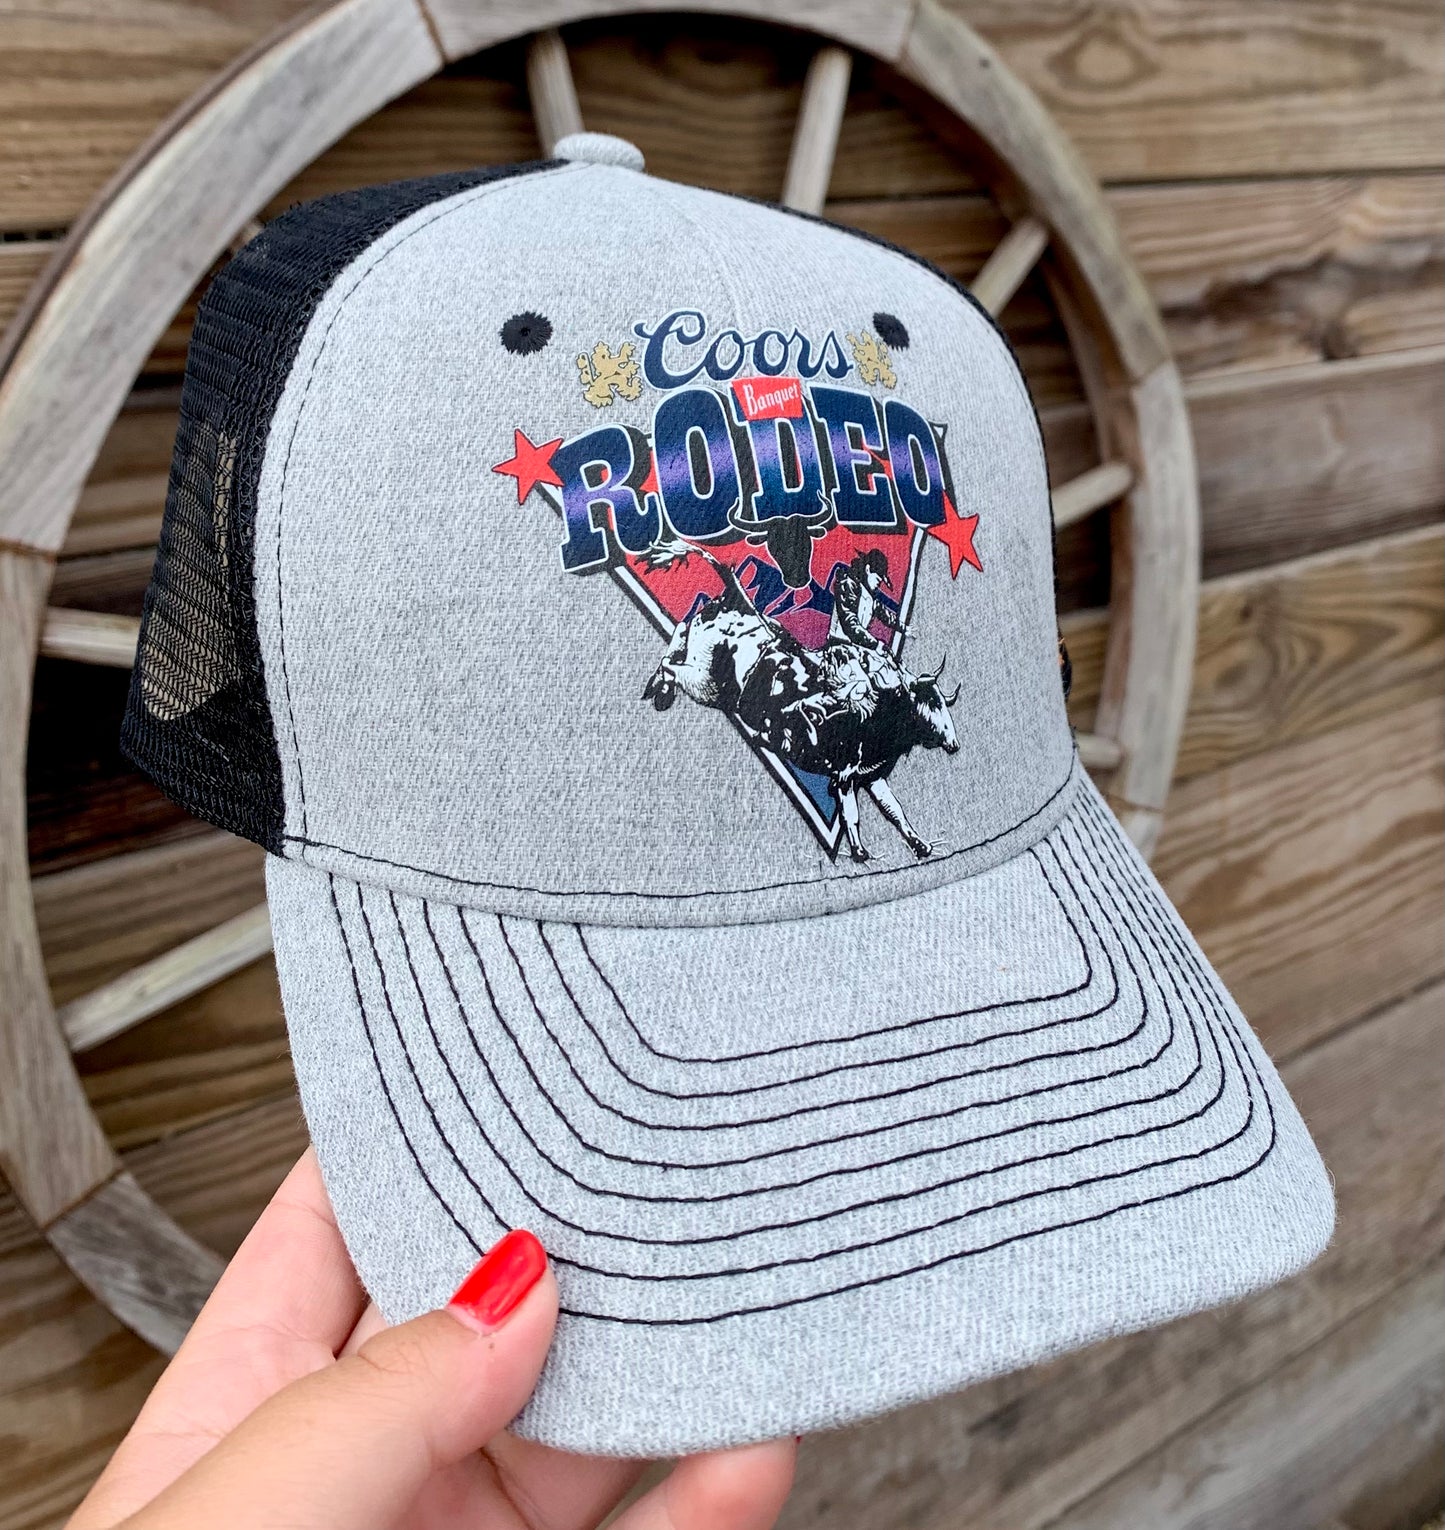 Coors Rodeo SnapBack